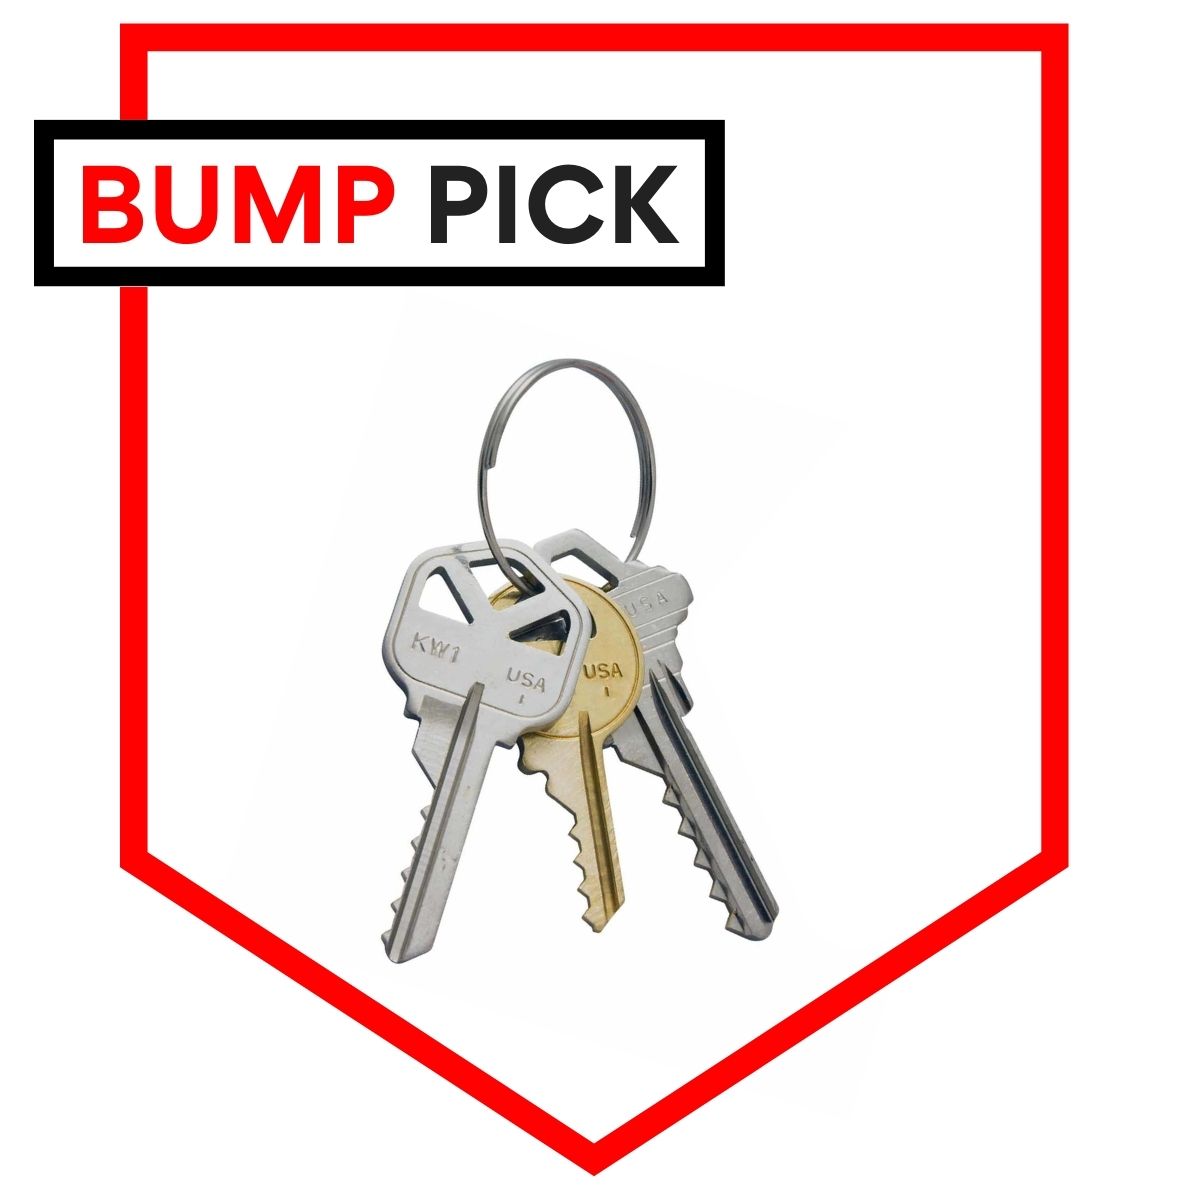 Bump Keys for Survival Lock Recovery Security Penetration Testing and SHTF